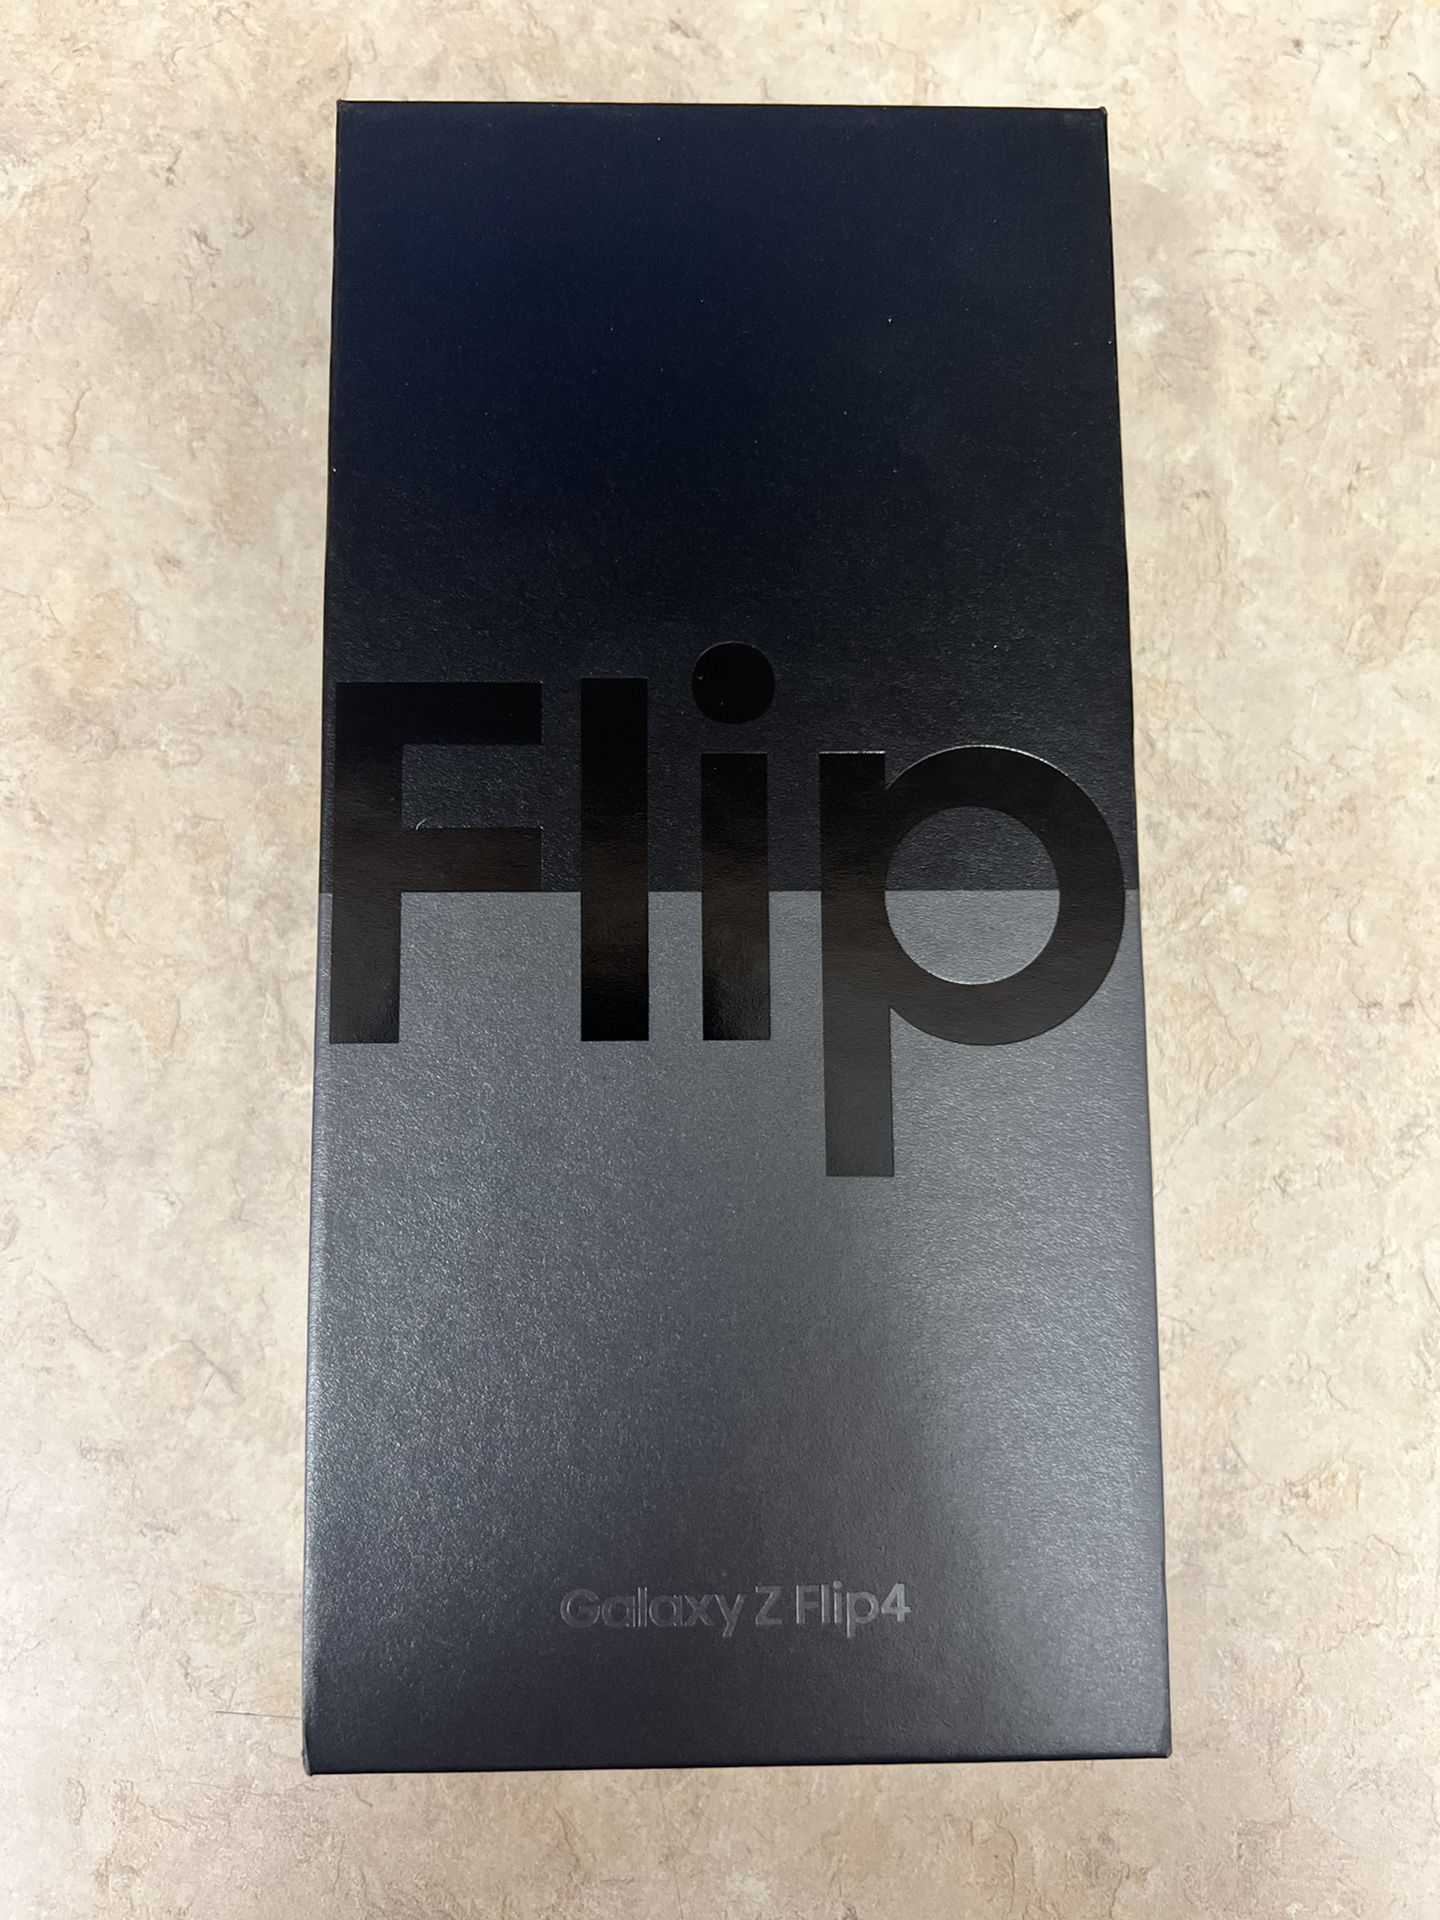 Samsung Galaxy Z Flip 4 (T-mobile Ready To Activate) 